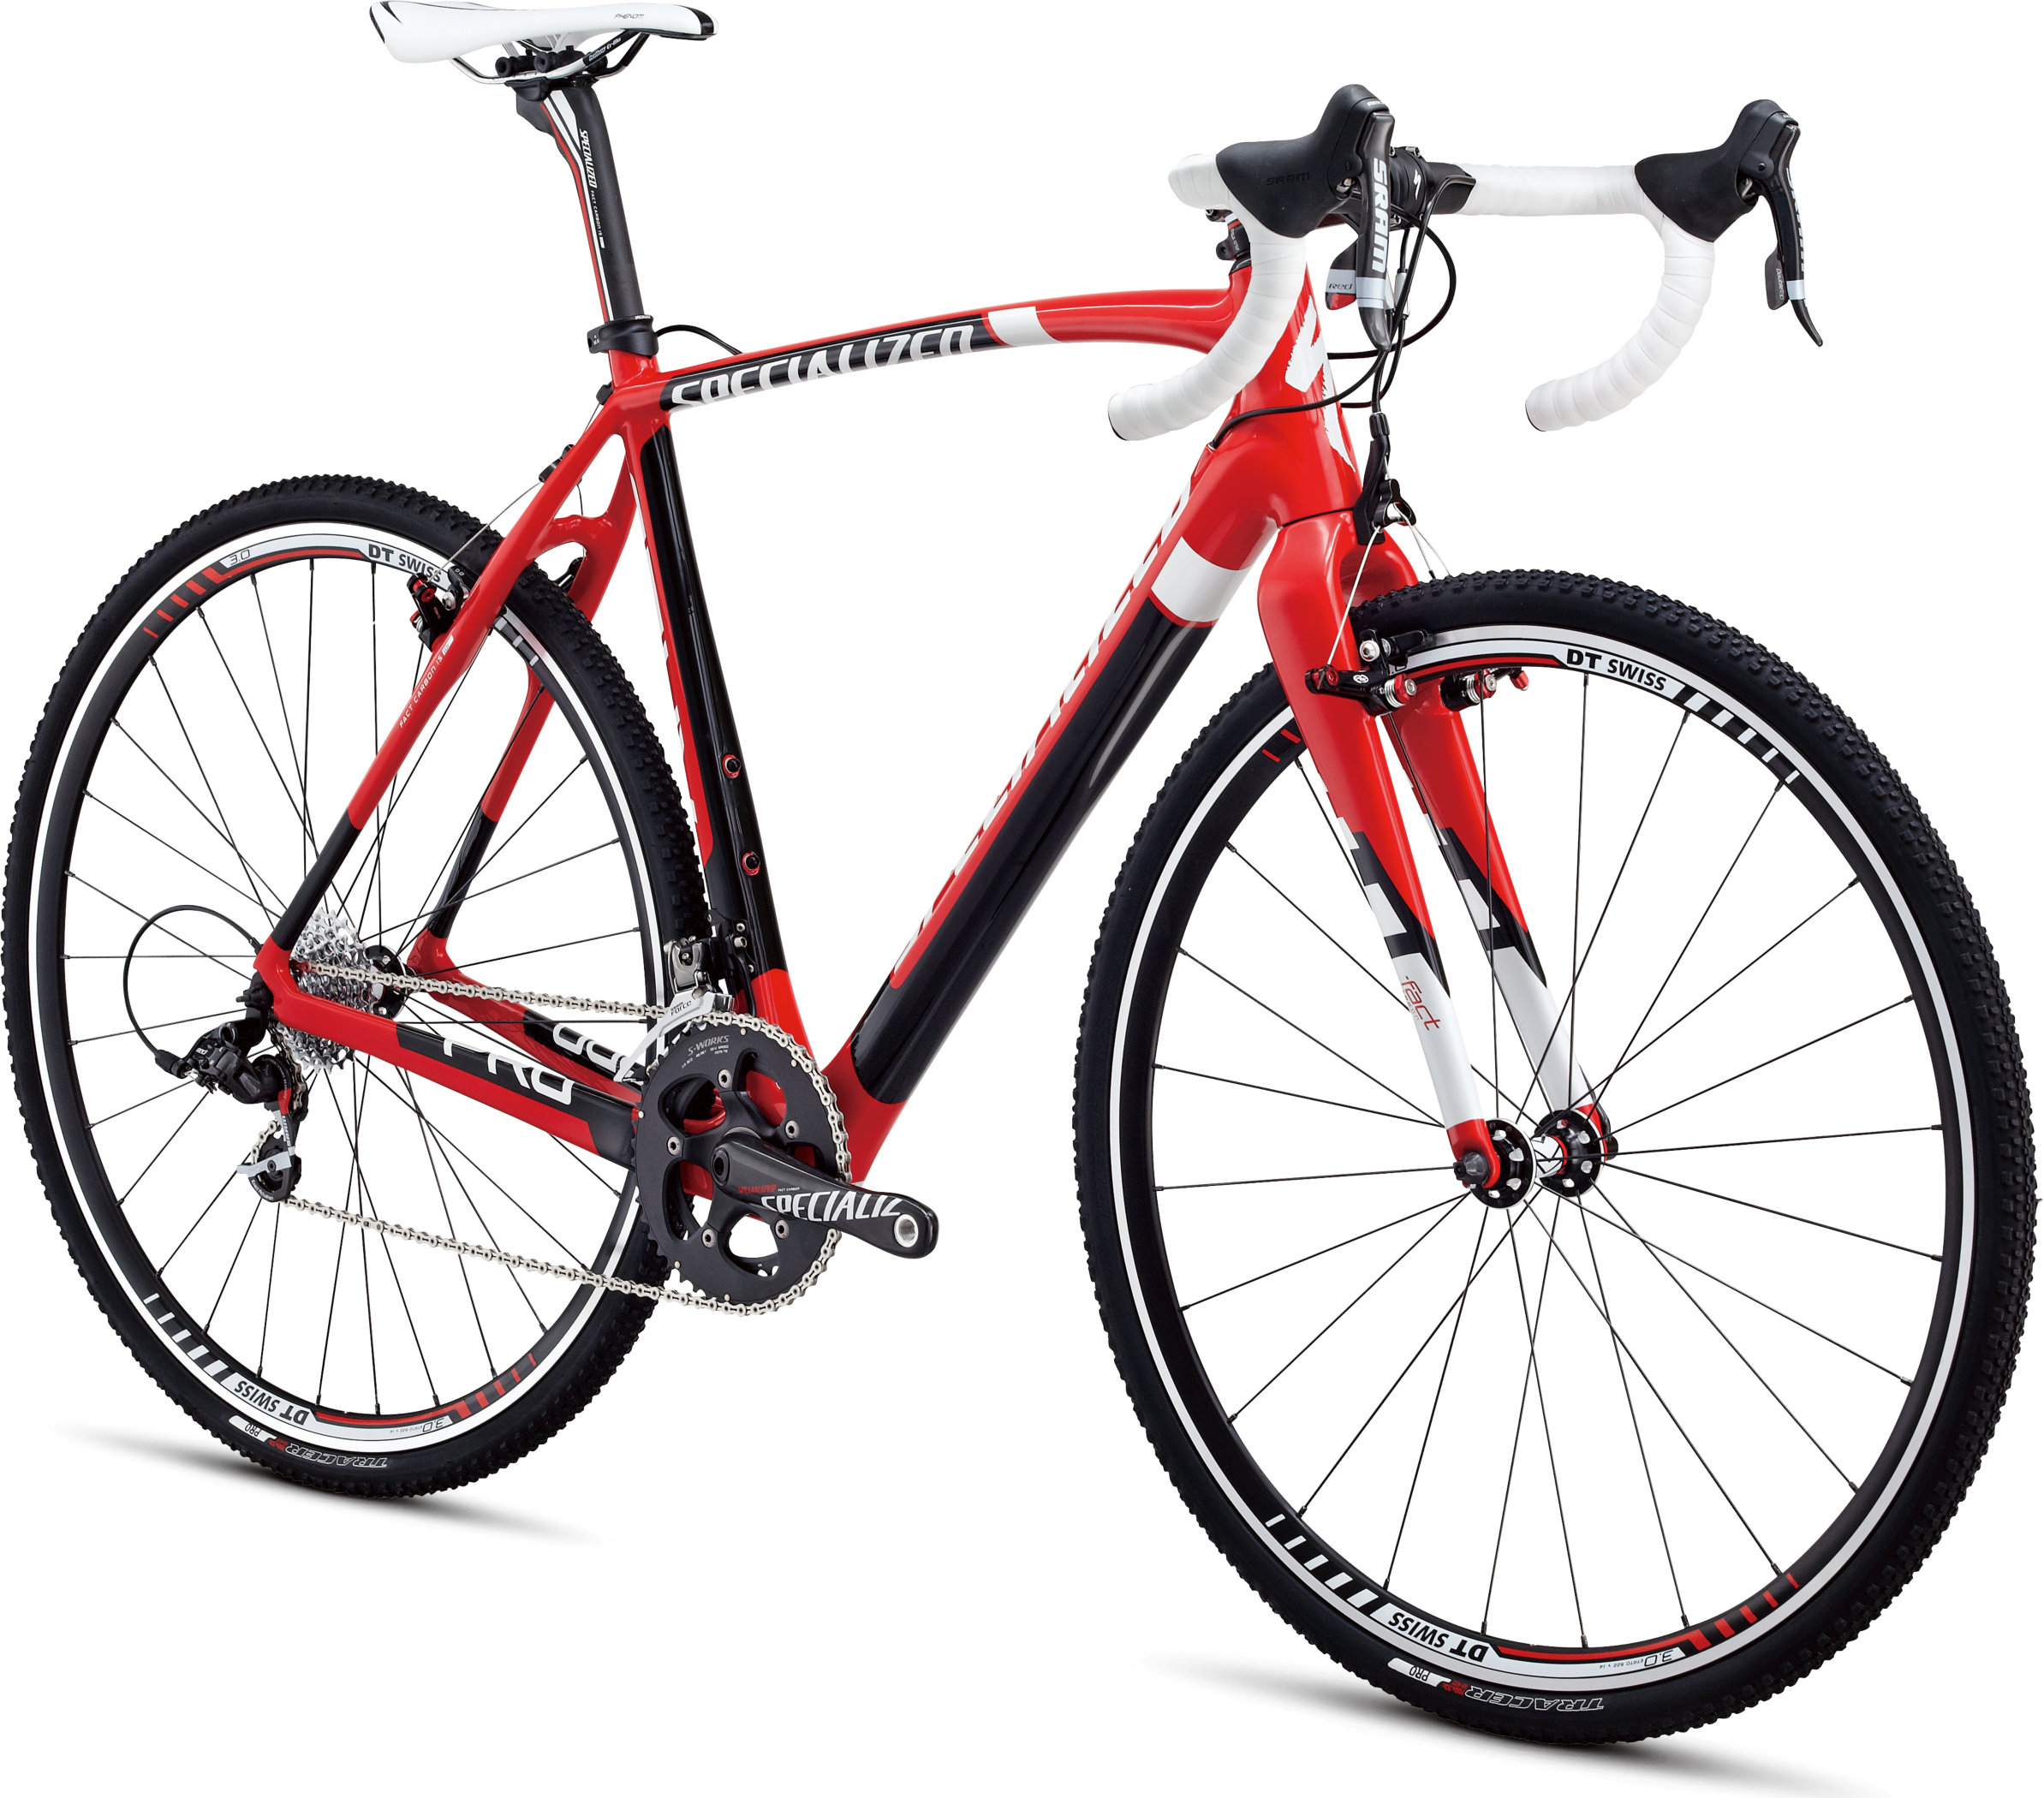 2014 specialized crux expert